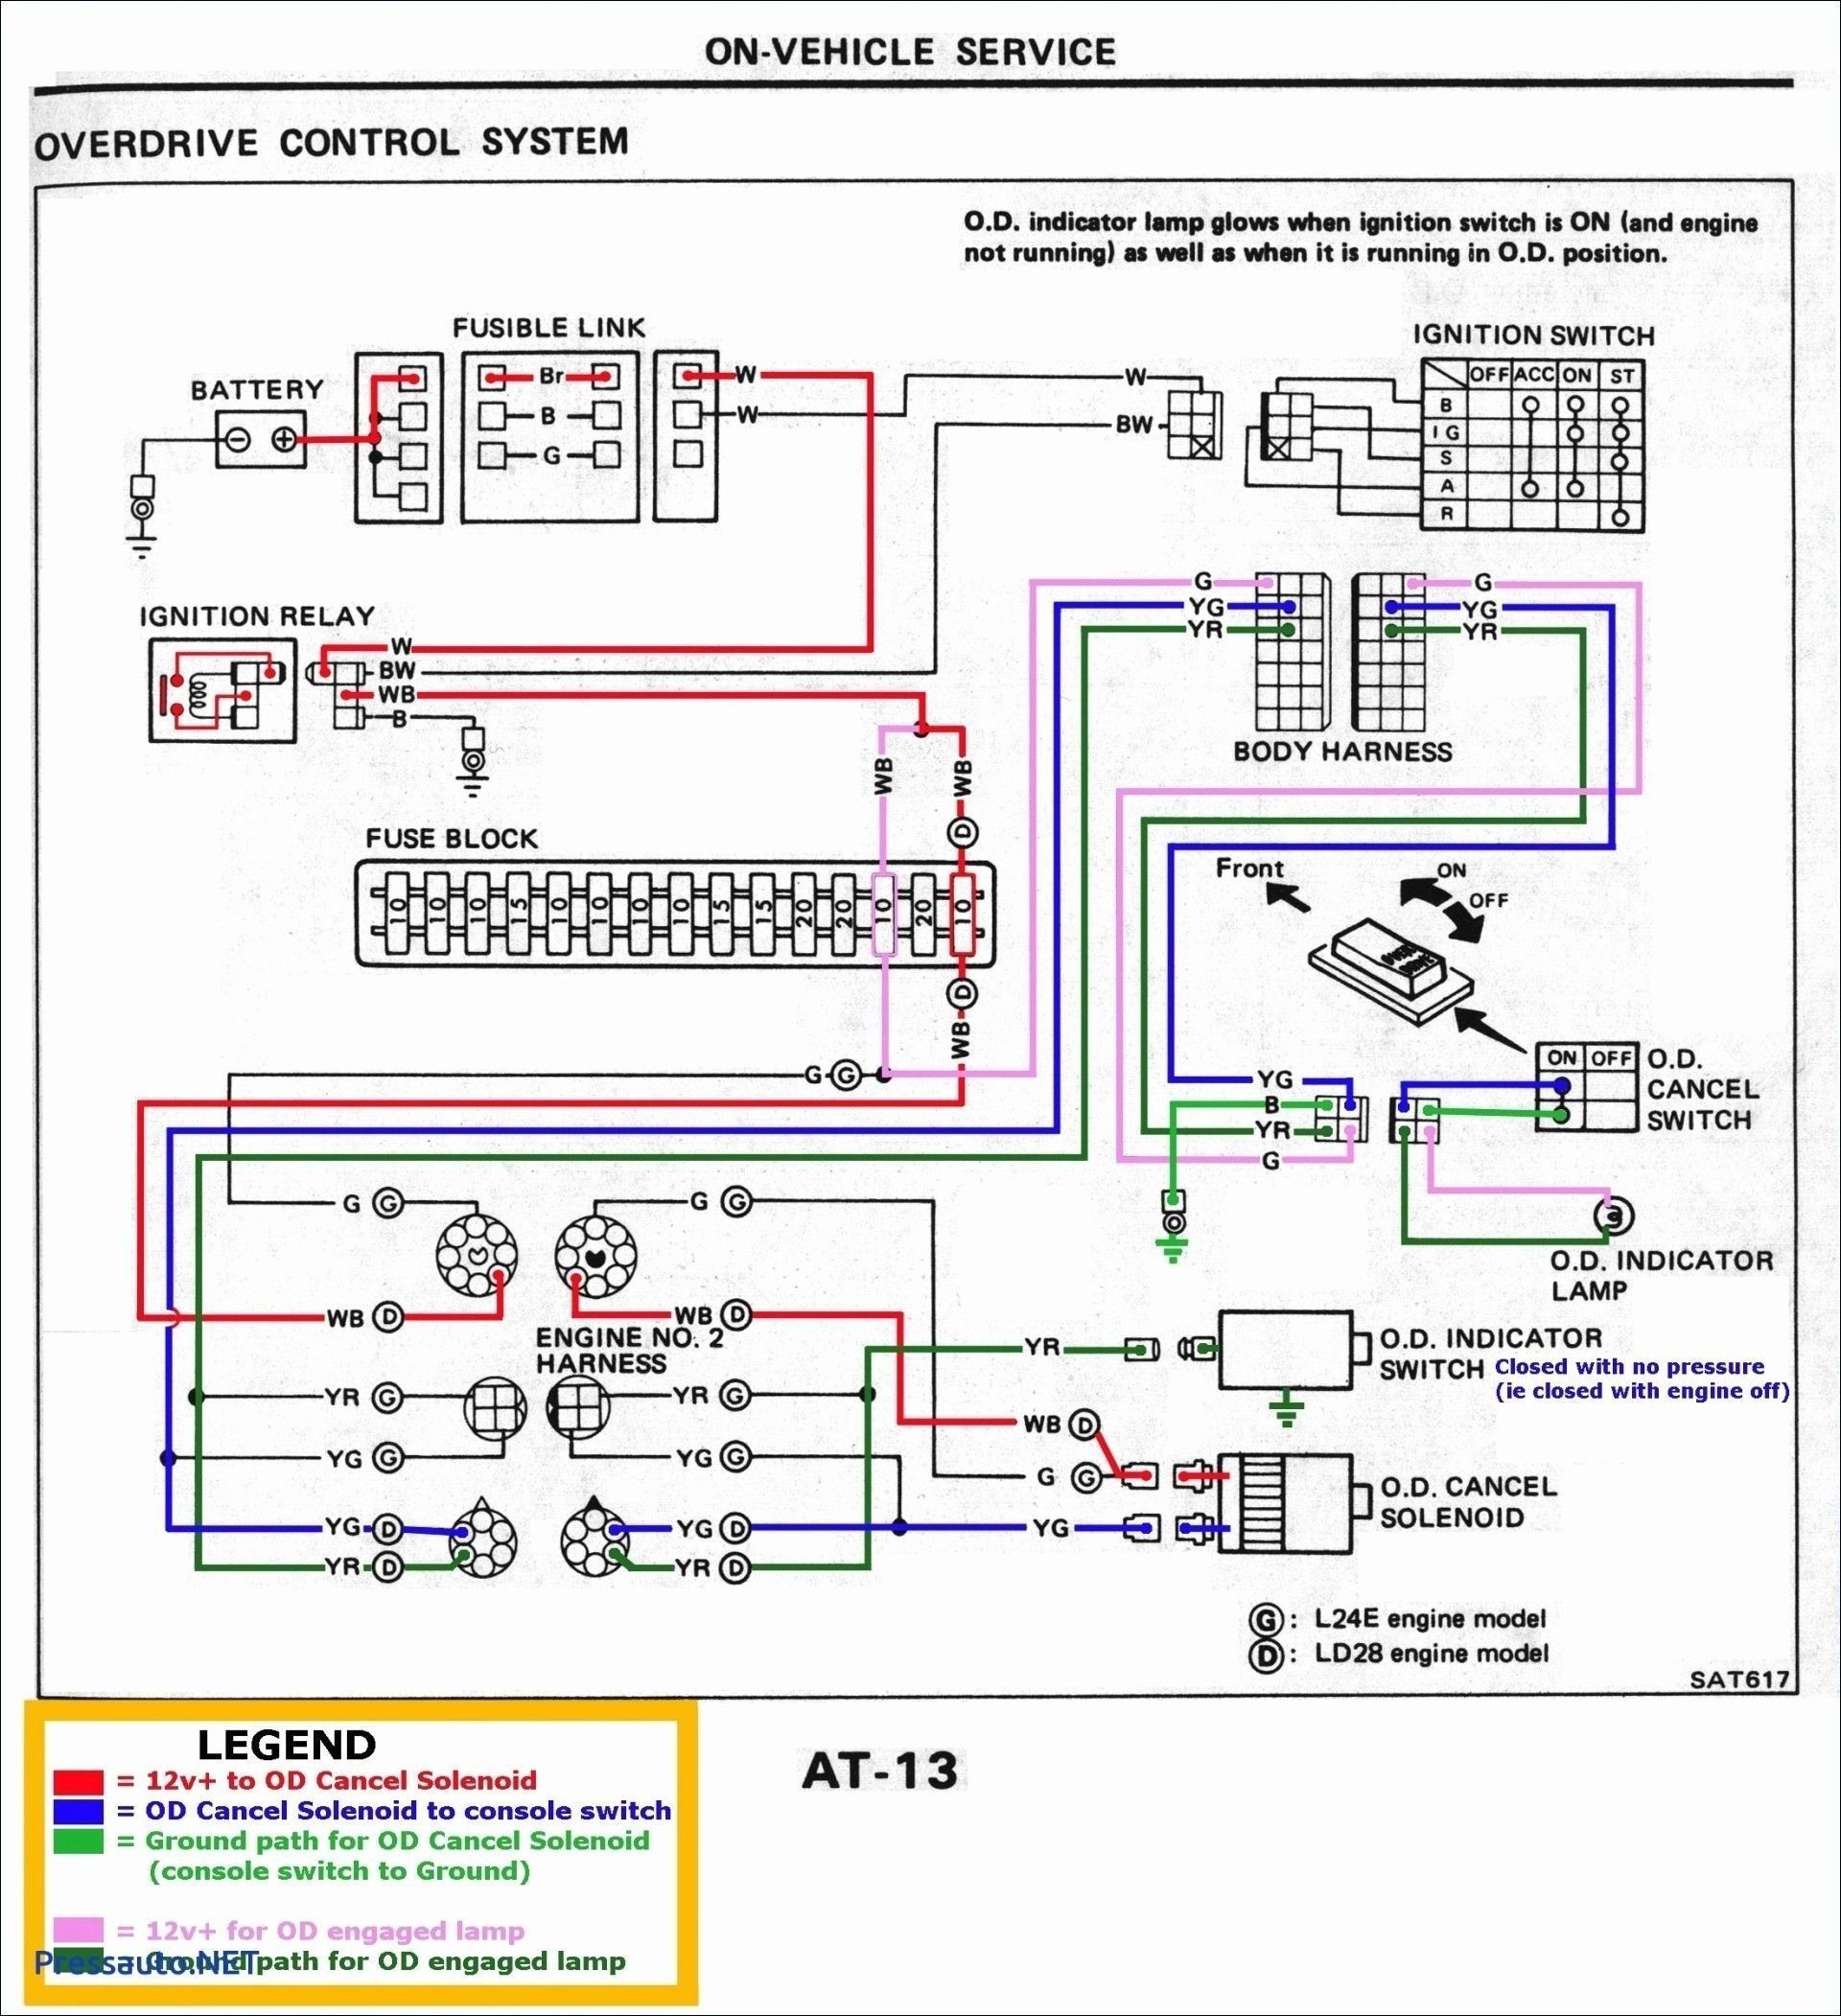 Automatic Transfer Switch Wiring Diagram Free Elegant Wiring Diagram astra H Diagrams Digramssample